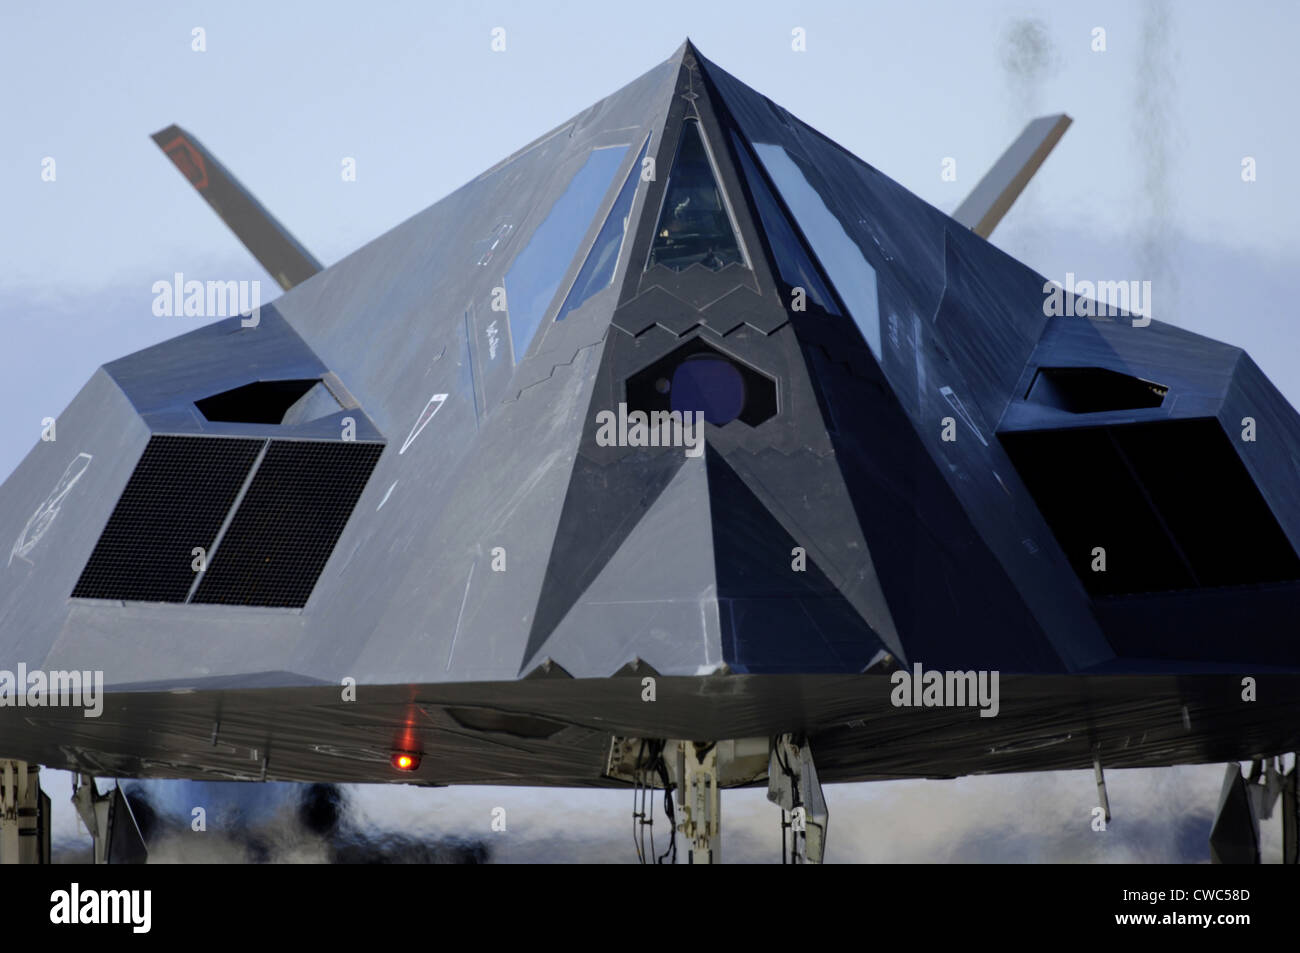 F-117 Nighthawk taxis on the runway before its flight at Holloman Air Force Base New Mexico. Oct. 27 2007. (BSLOC 2011 12 229) Stock Photo